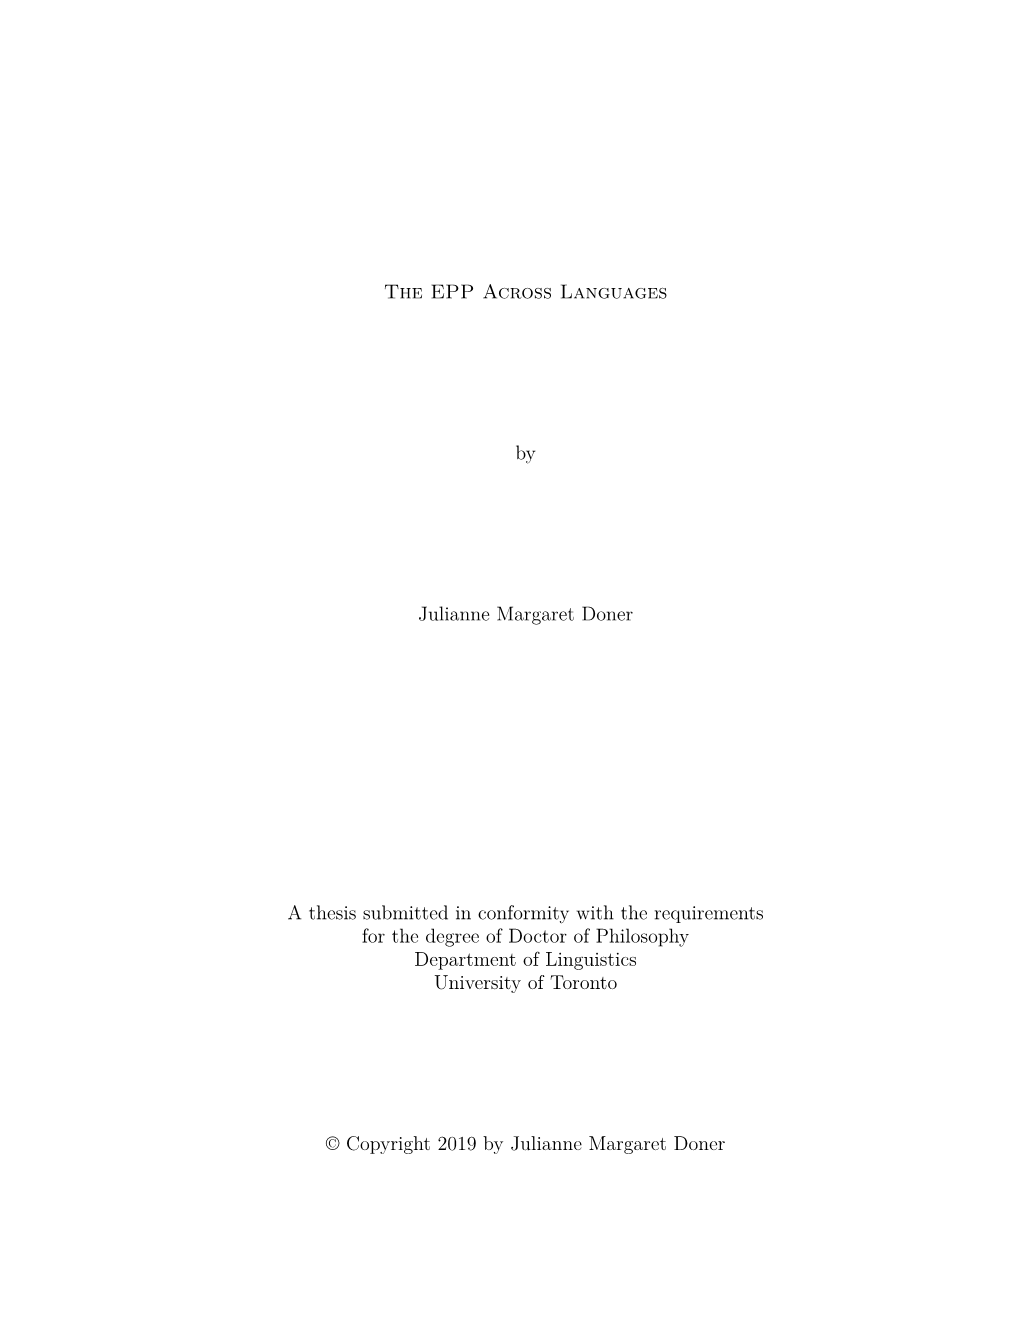 The EPP Across Languages by Julianne Margaret Doner a Thesis